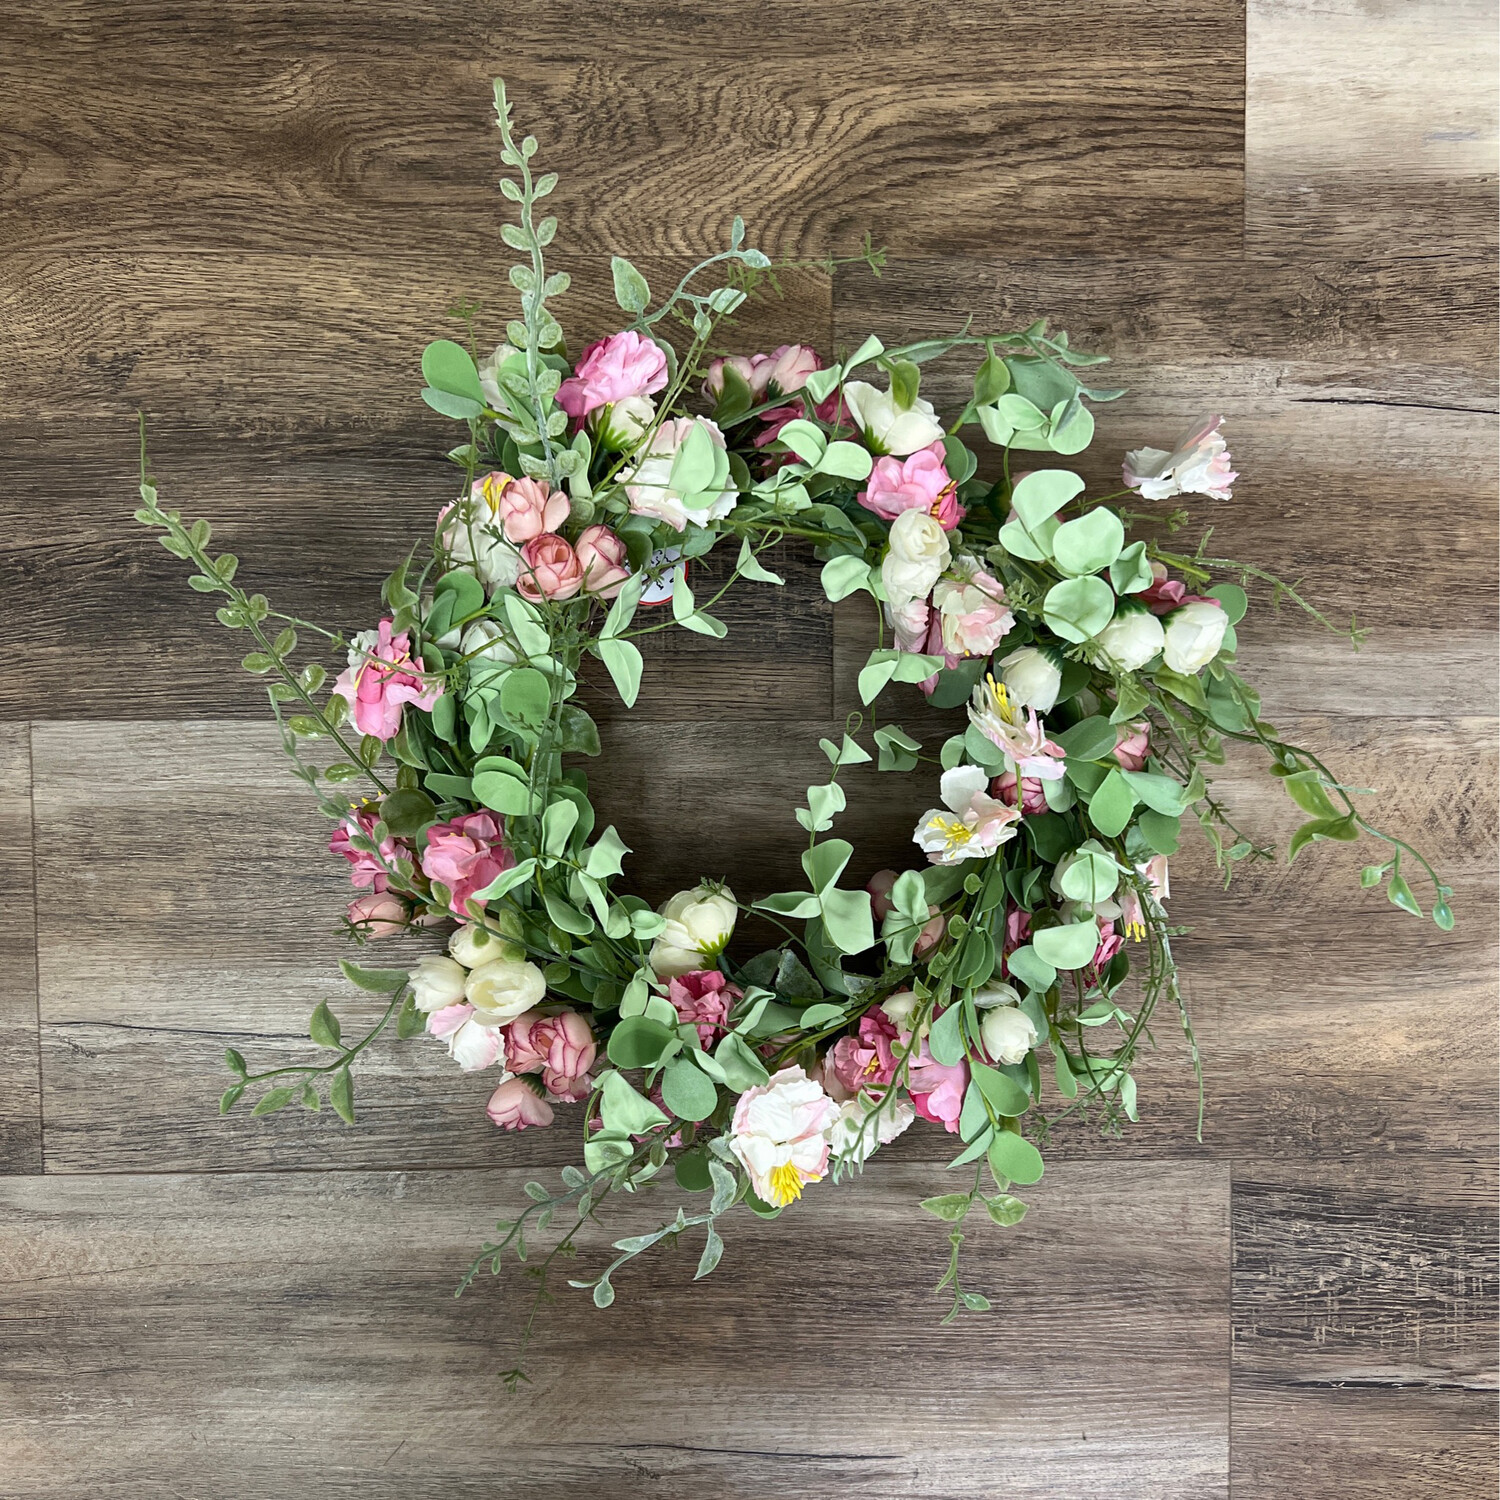 Mixed Floral Wreath 23"